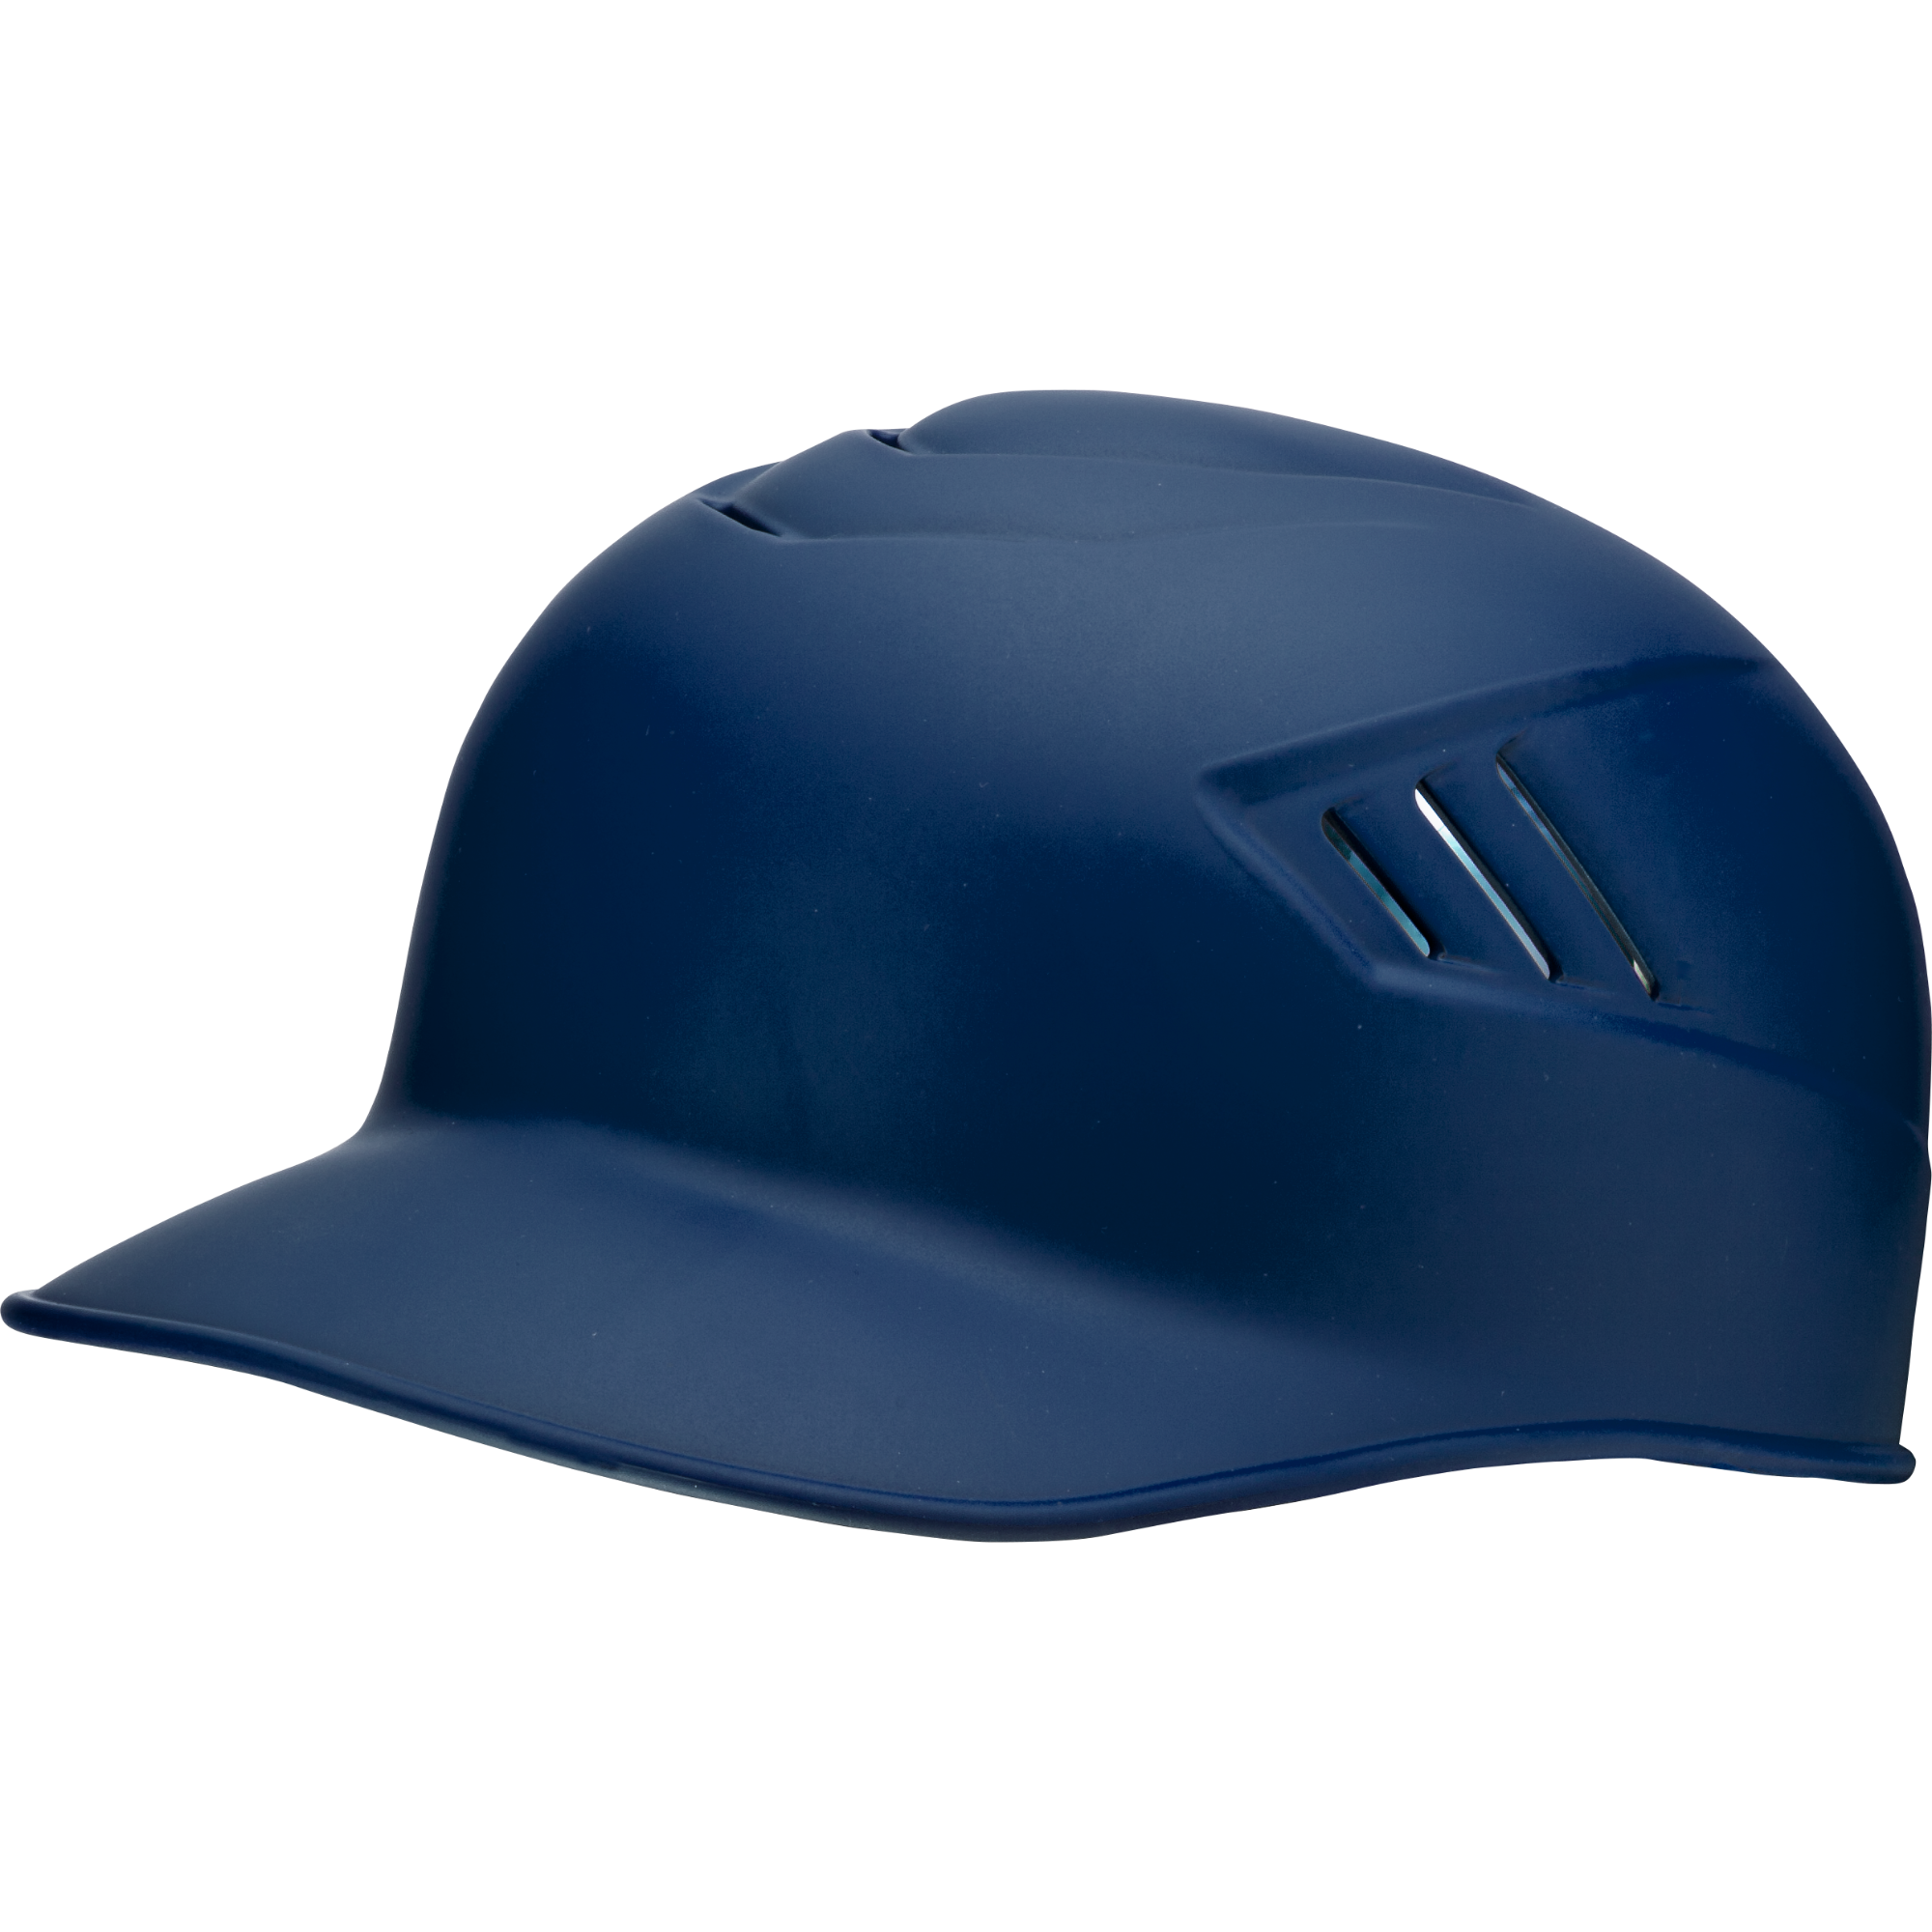 Rawlings Coolflo 1-Tone Catchers And Base Coach Skull Cap Helmet - Matte Navy